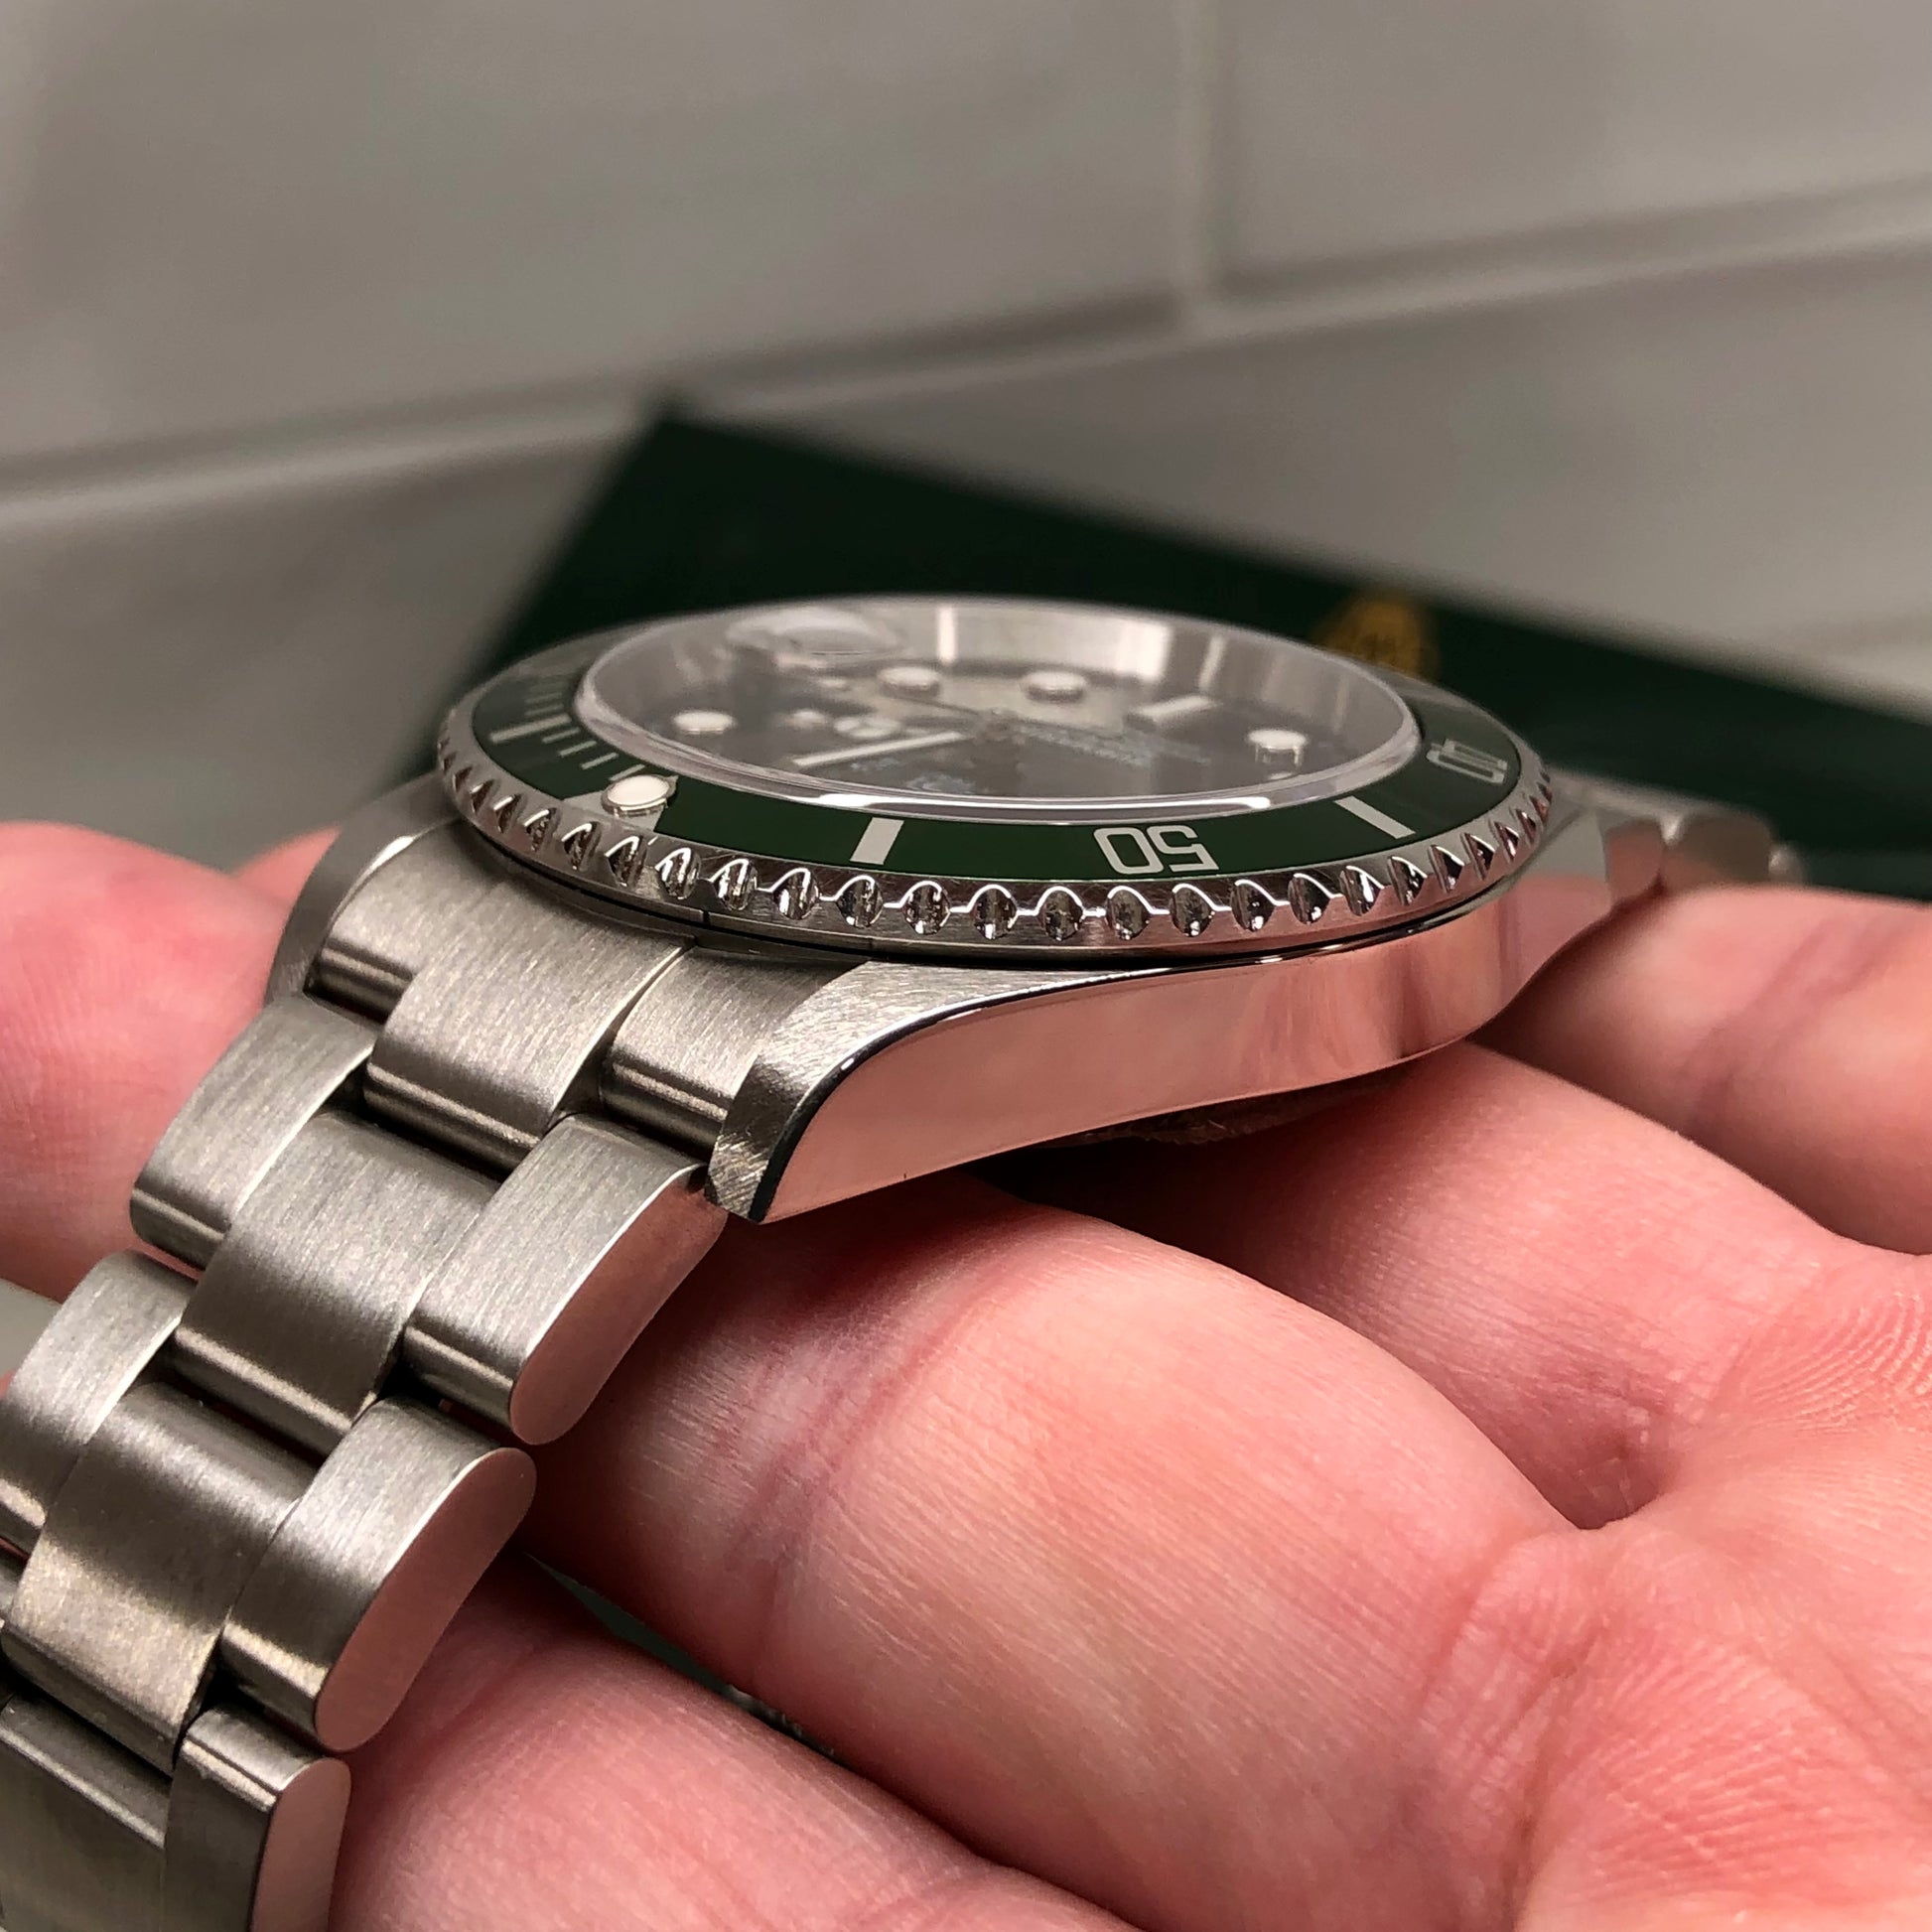 ROLEX, Submariner, Ref. 16610LV, A Stainless Steel Wristwatch with “Flat  4” Bezel and Bracelet, Circa 2004, Watches Online: The Driver's Collection, Watches